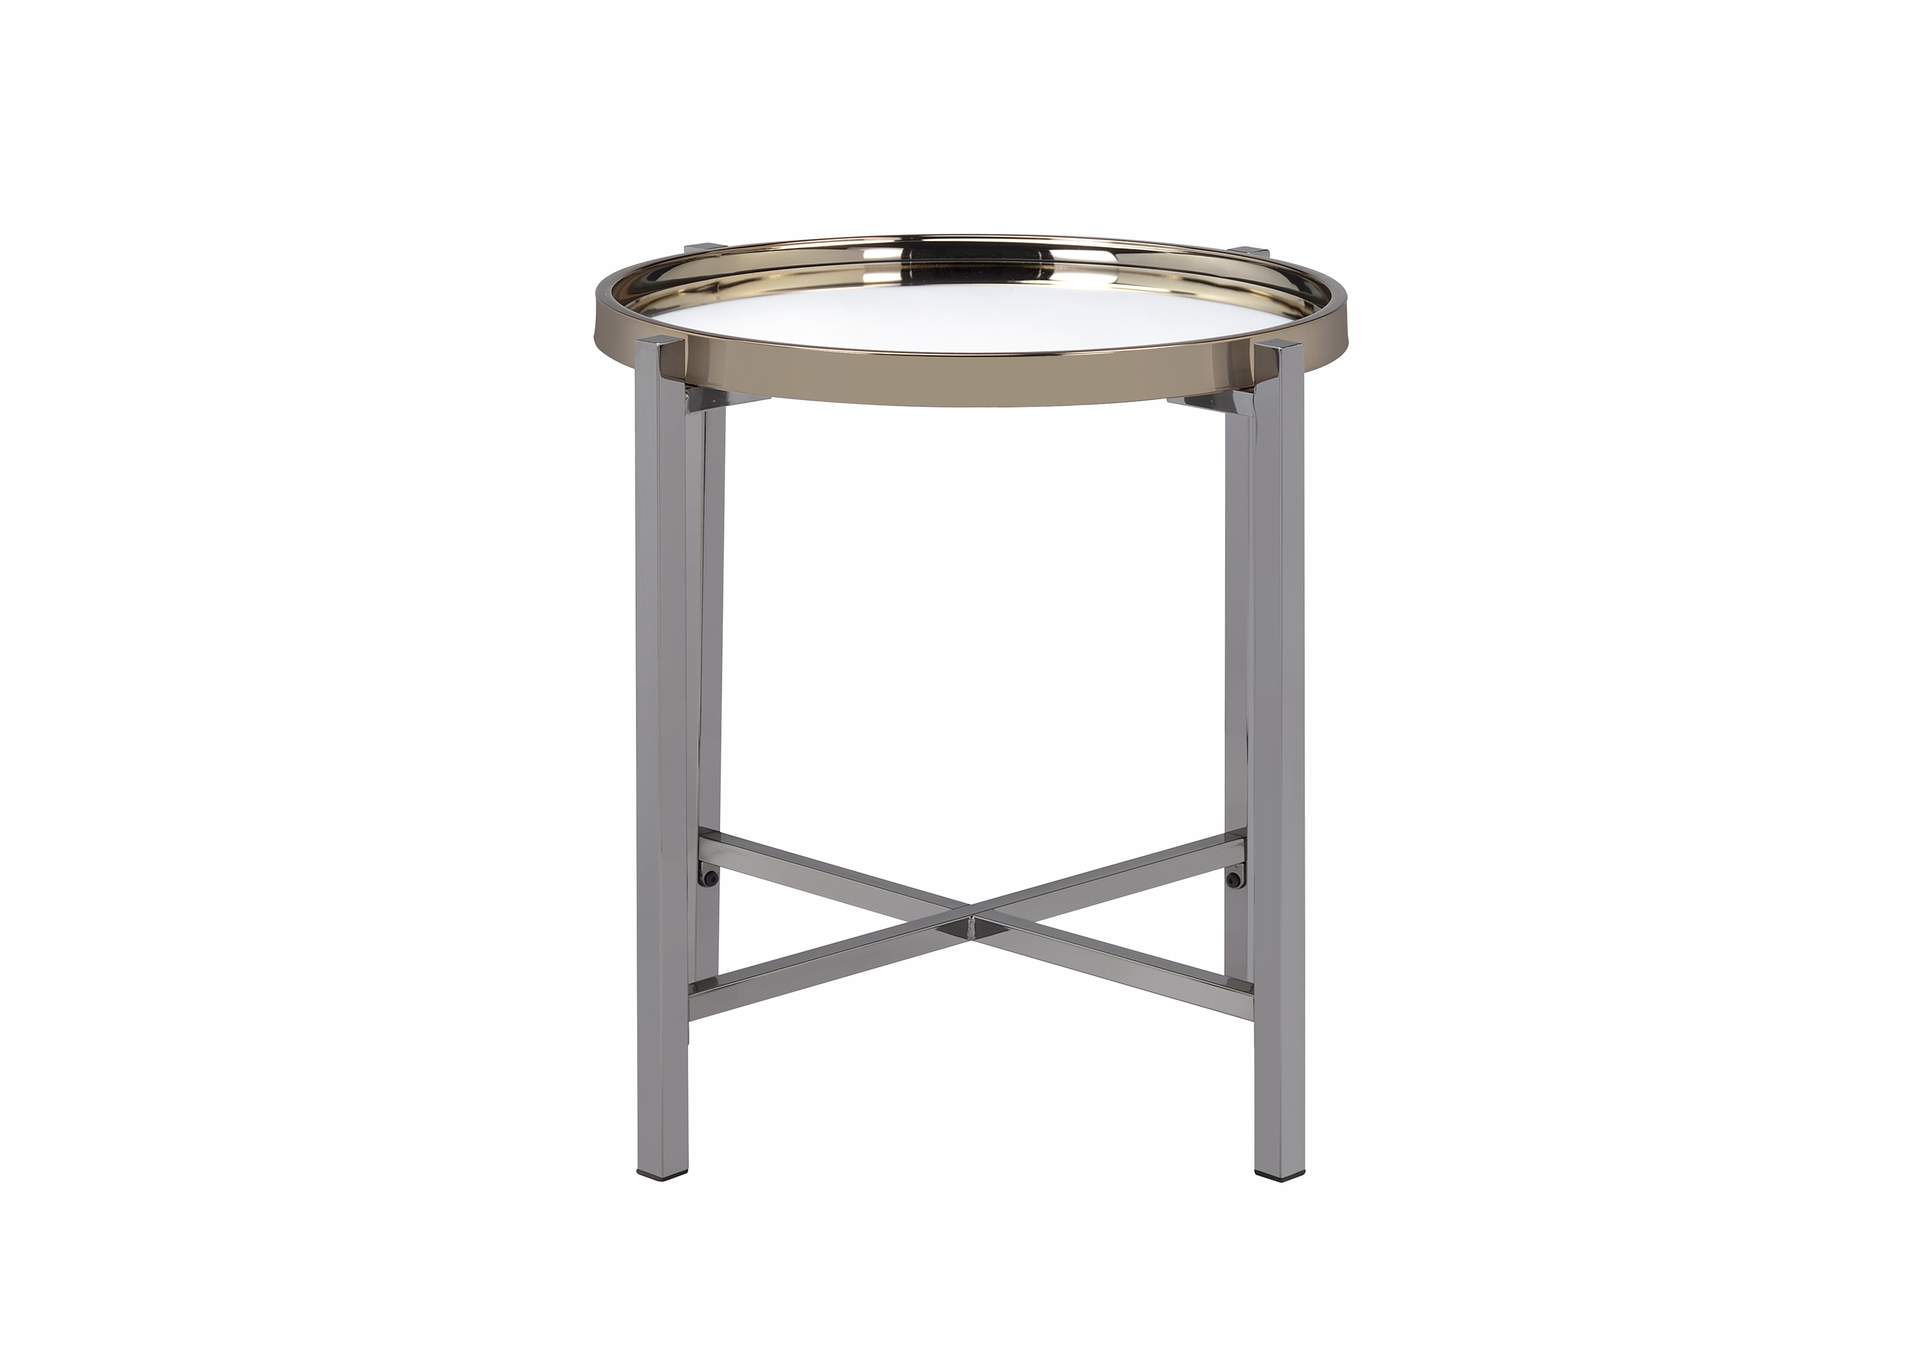 Edith C - 1112 End Table,Elements